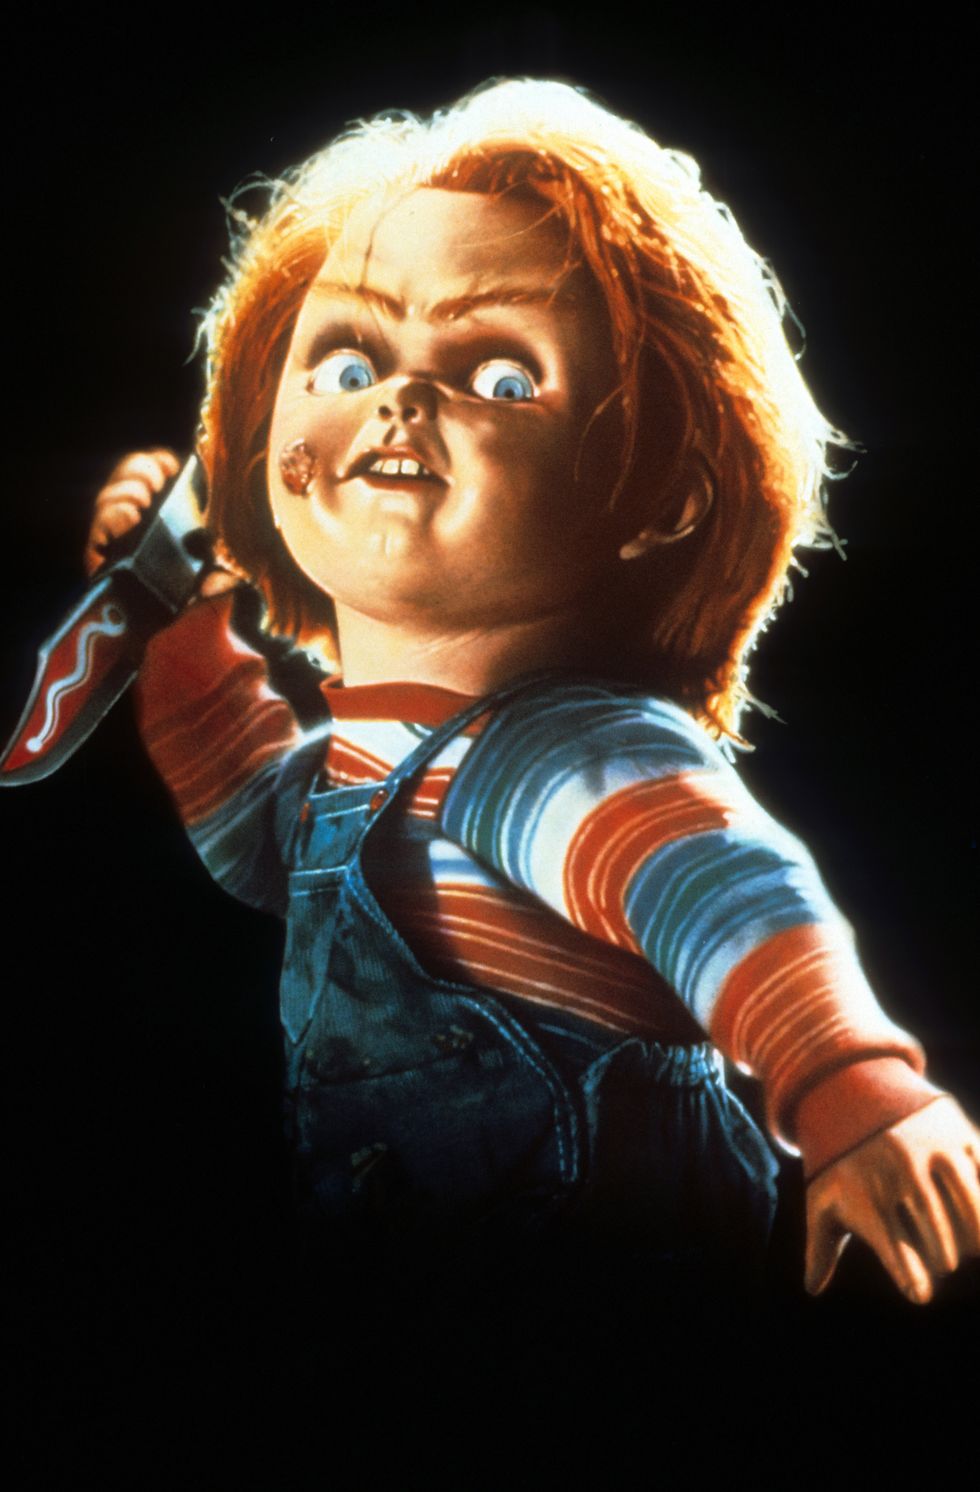 scariest horror movie characters, chucky child's play